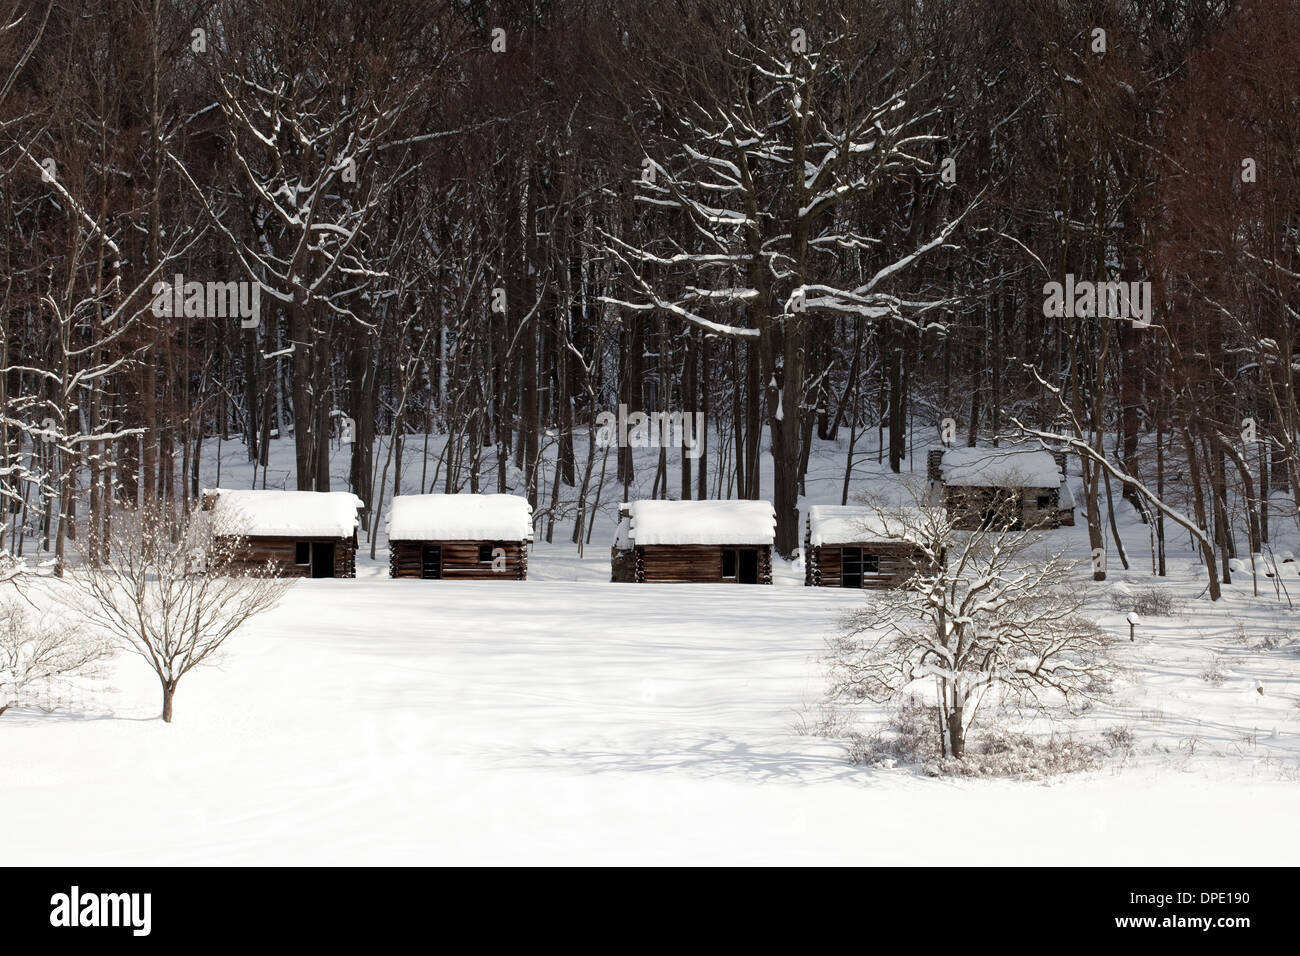 Soldier huts in winter, Jockey Hollow, Morristown National Historical Park, New Jersey Stock Photo